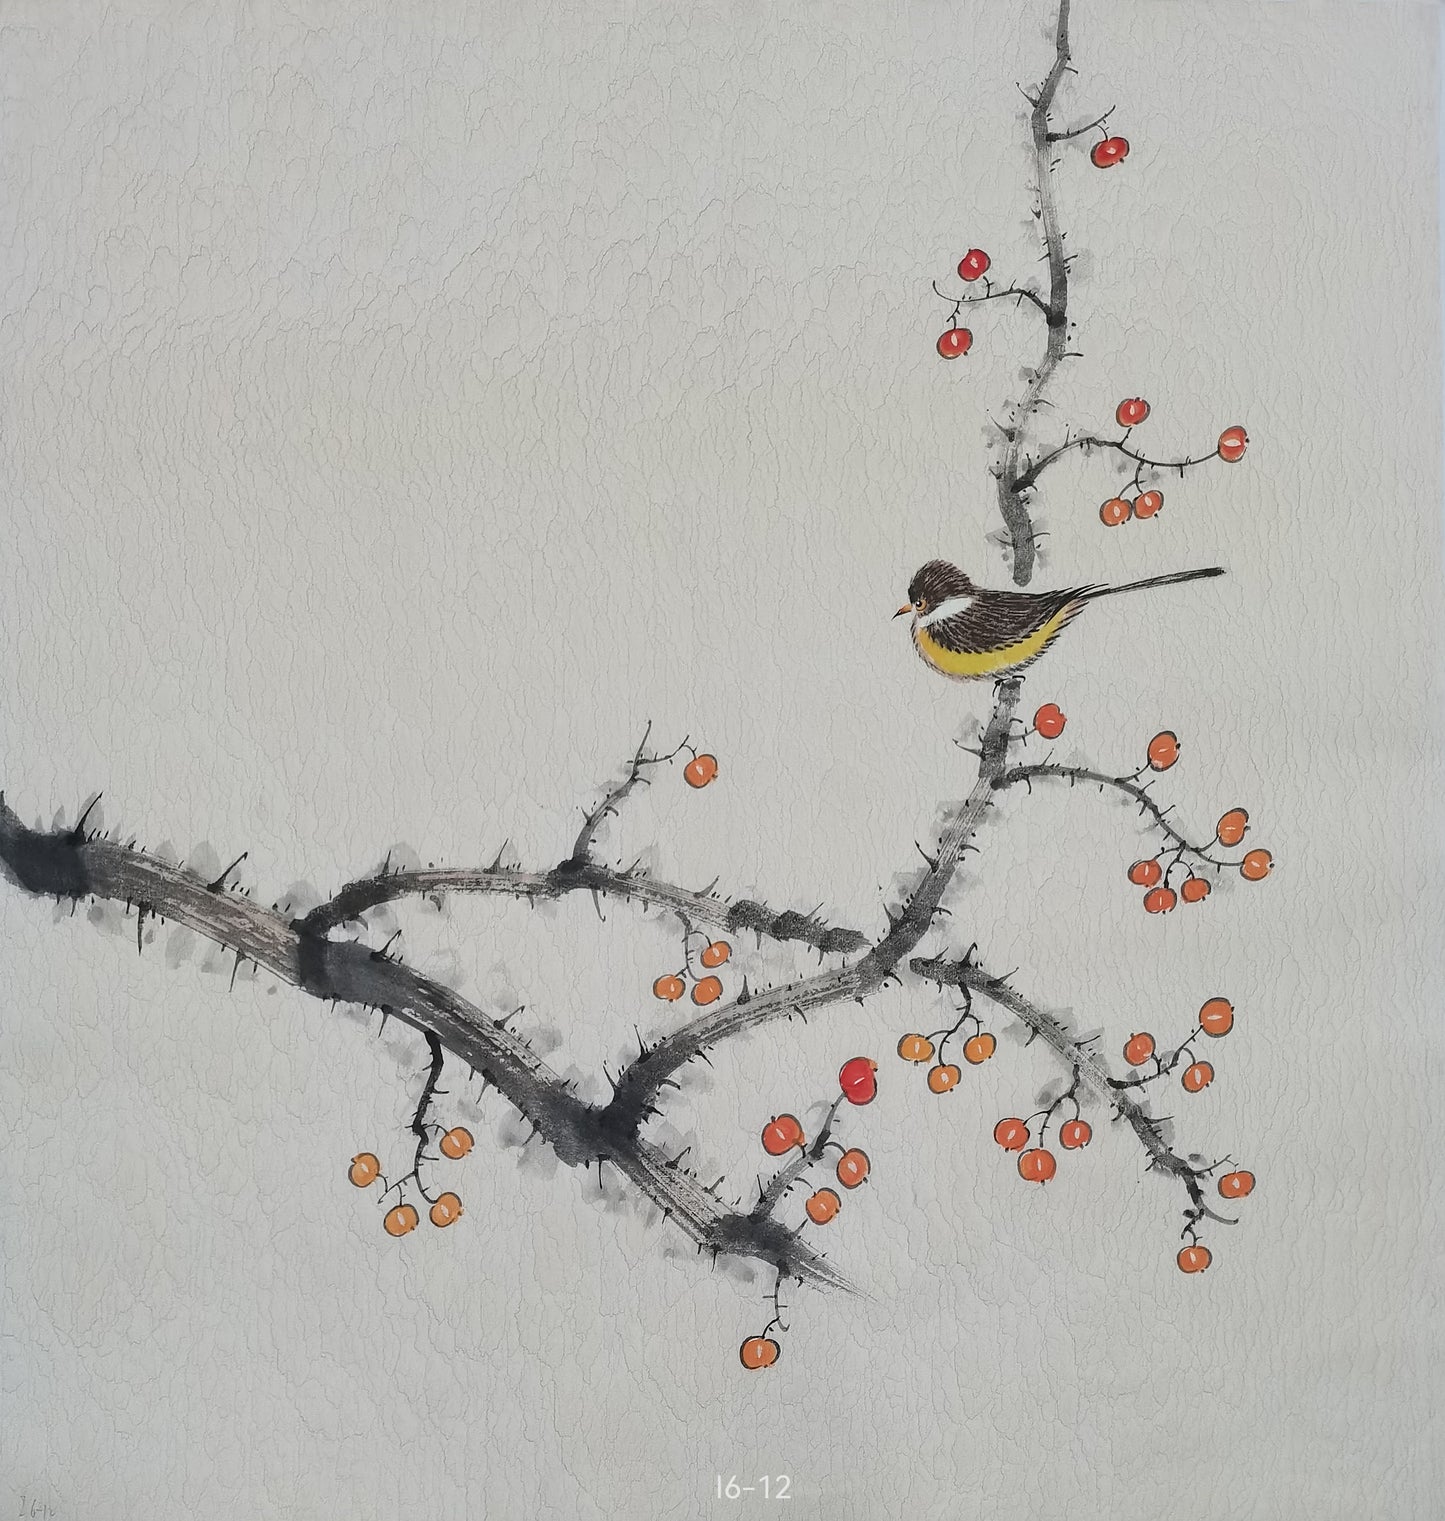 Chinese painting-Plants. Plum blossom and birds. Study decoration.